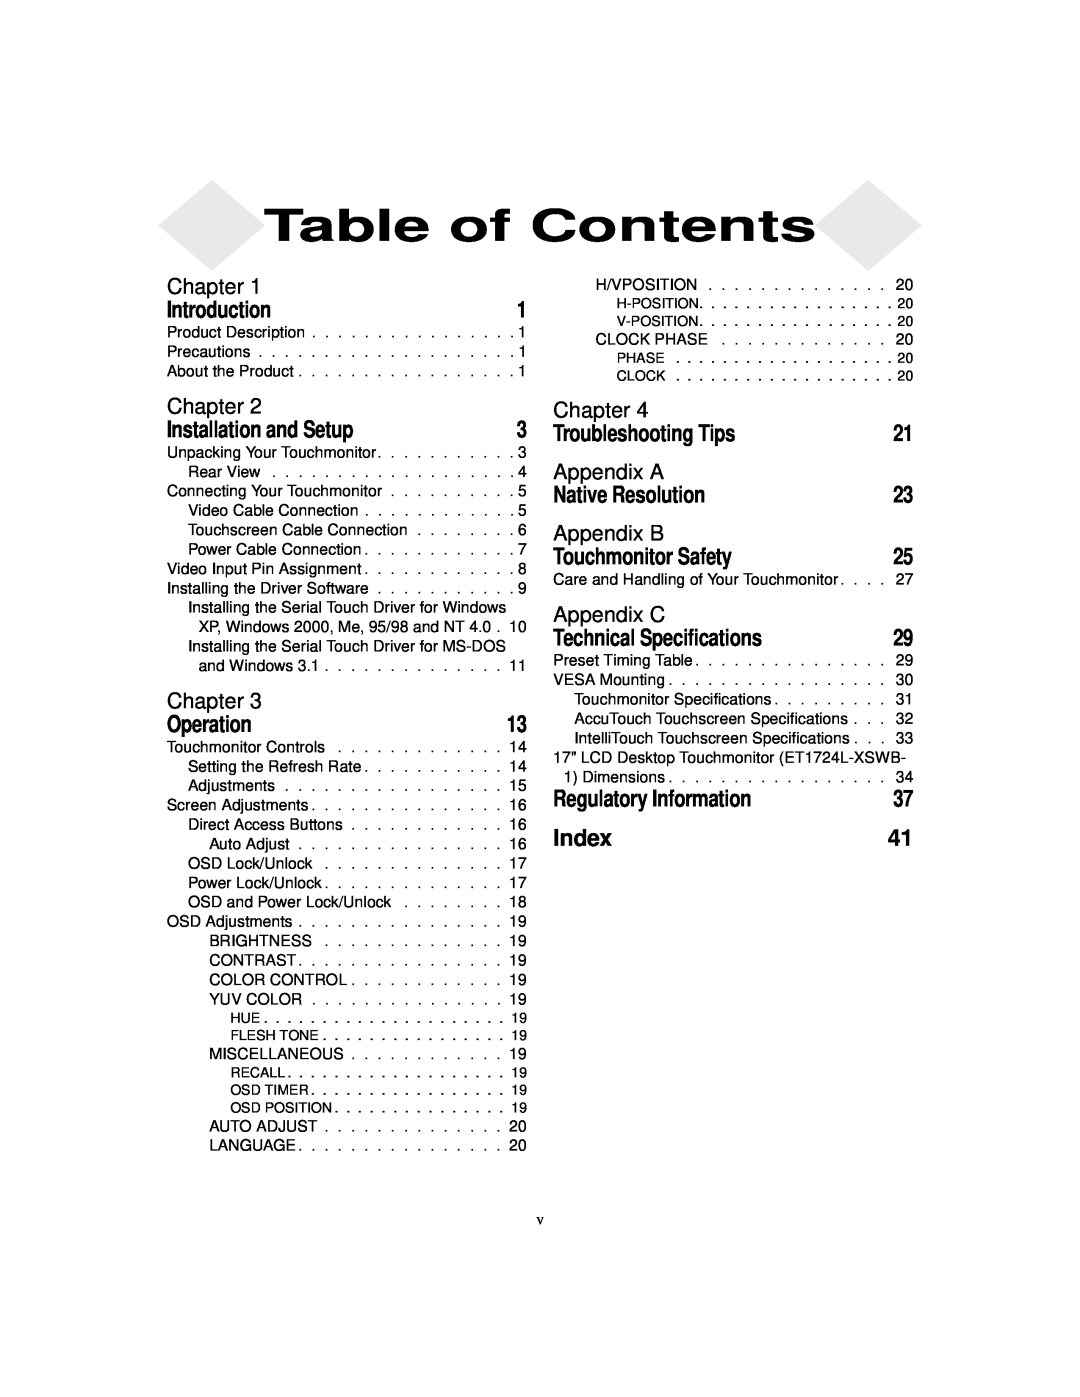 Elo TouchSystems ET1724L-8SWB-1-NL, ET1724L-7SWB-1-NL Chapter, Table of Contents, Introduction, Installation and Setup 